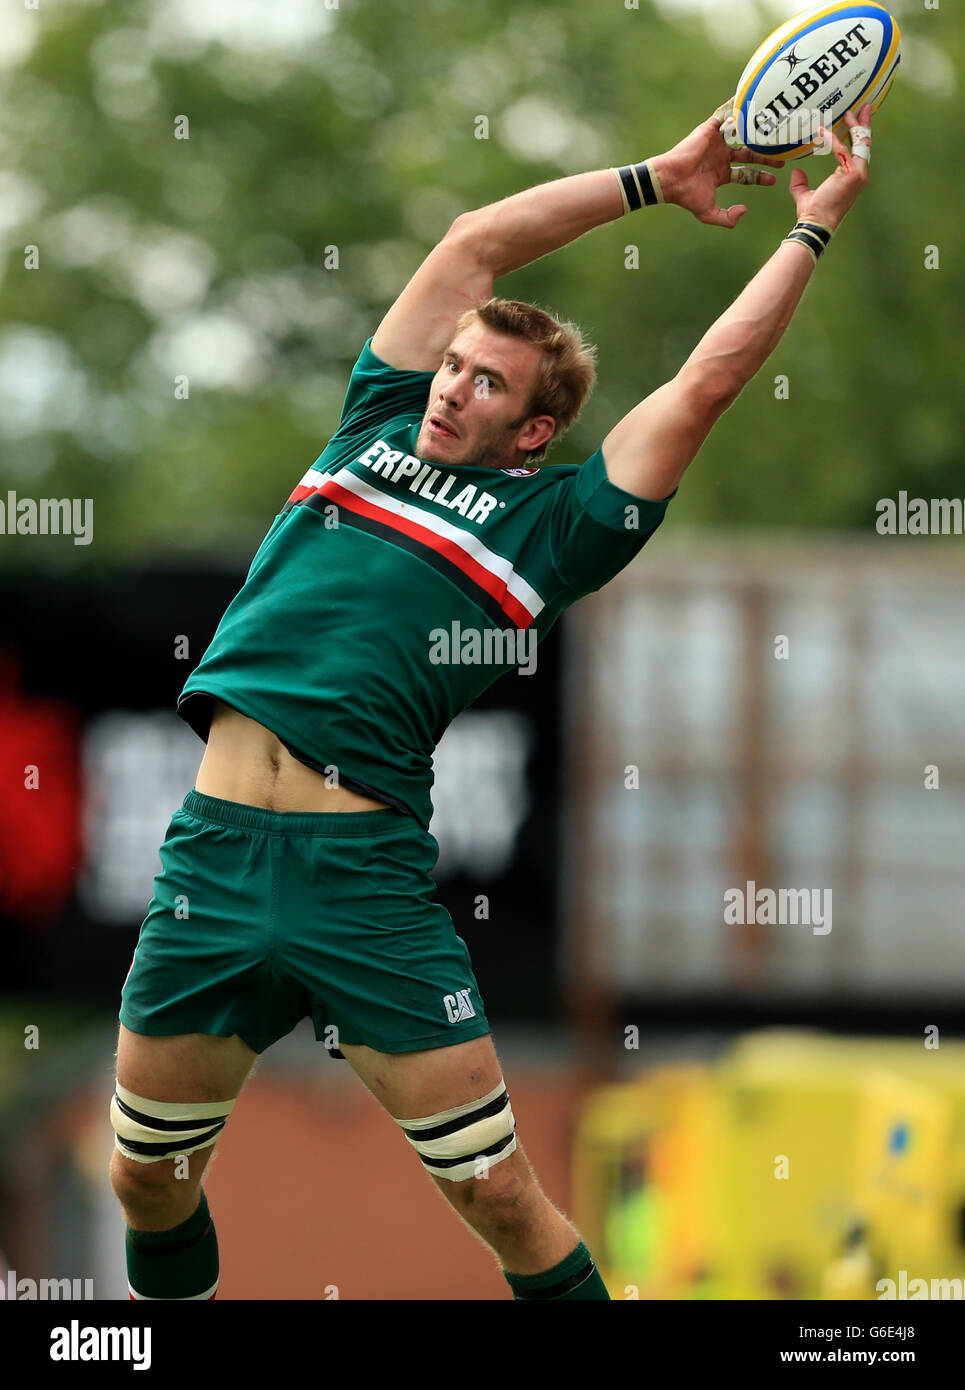 Leicester Tigers' Tom Croft jumps for the bal during the Aviva Premiership match at Welford Road, Leicester. Stock Photo